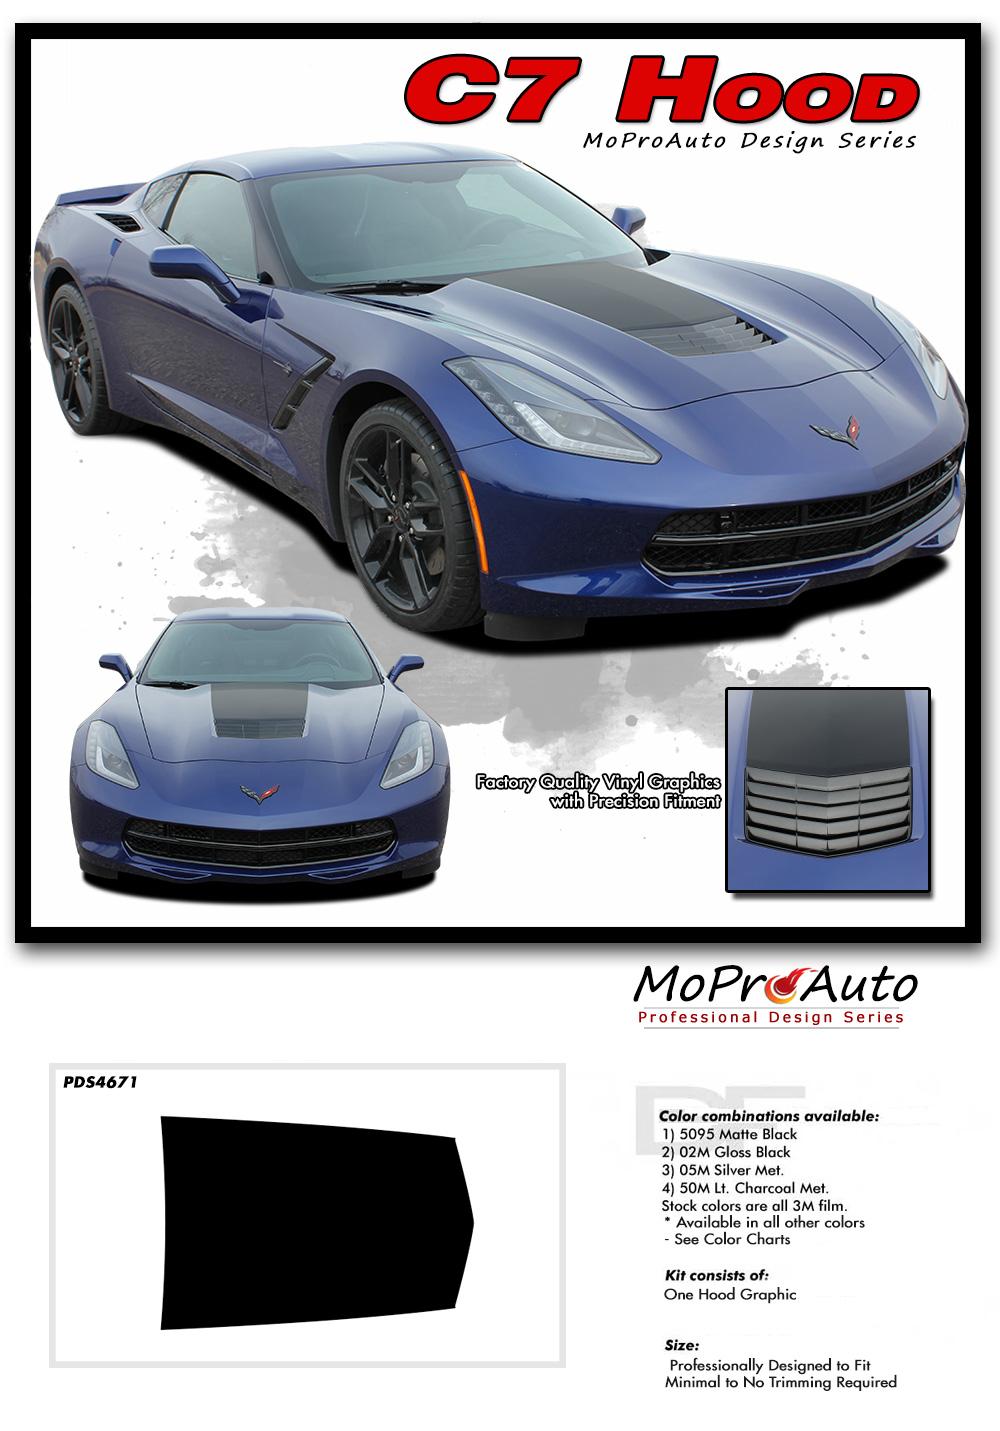 Chevy Corvette C7 Vinyl Graphics Stripes Striping and Decal Kits for 2014 2015 2016 2017 2018 2019 Models